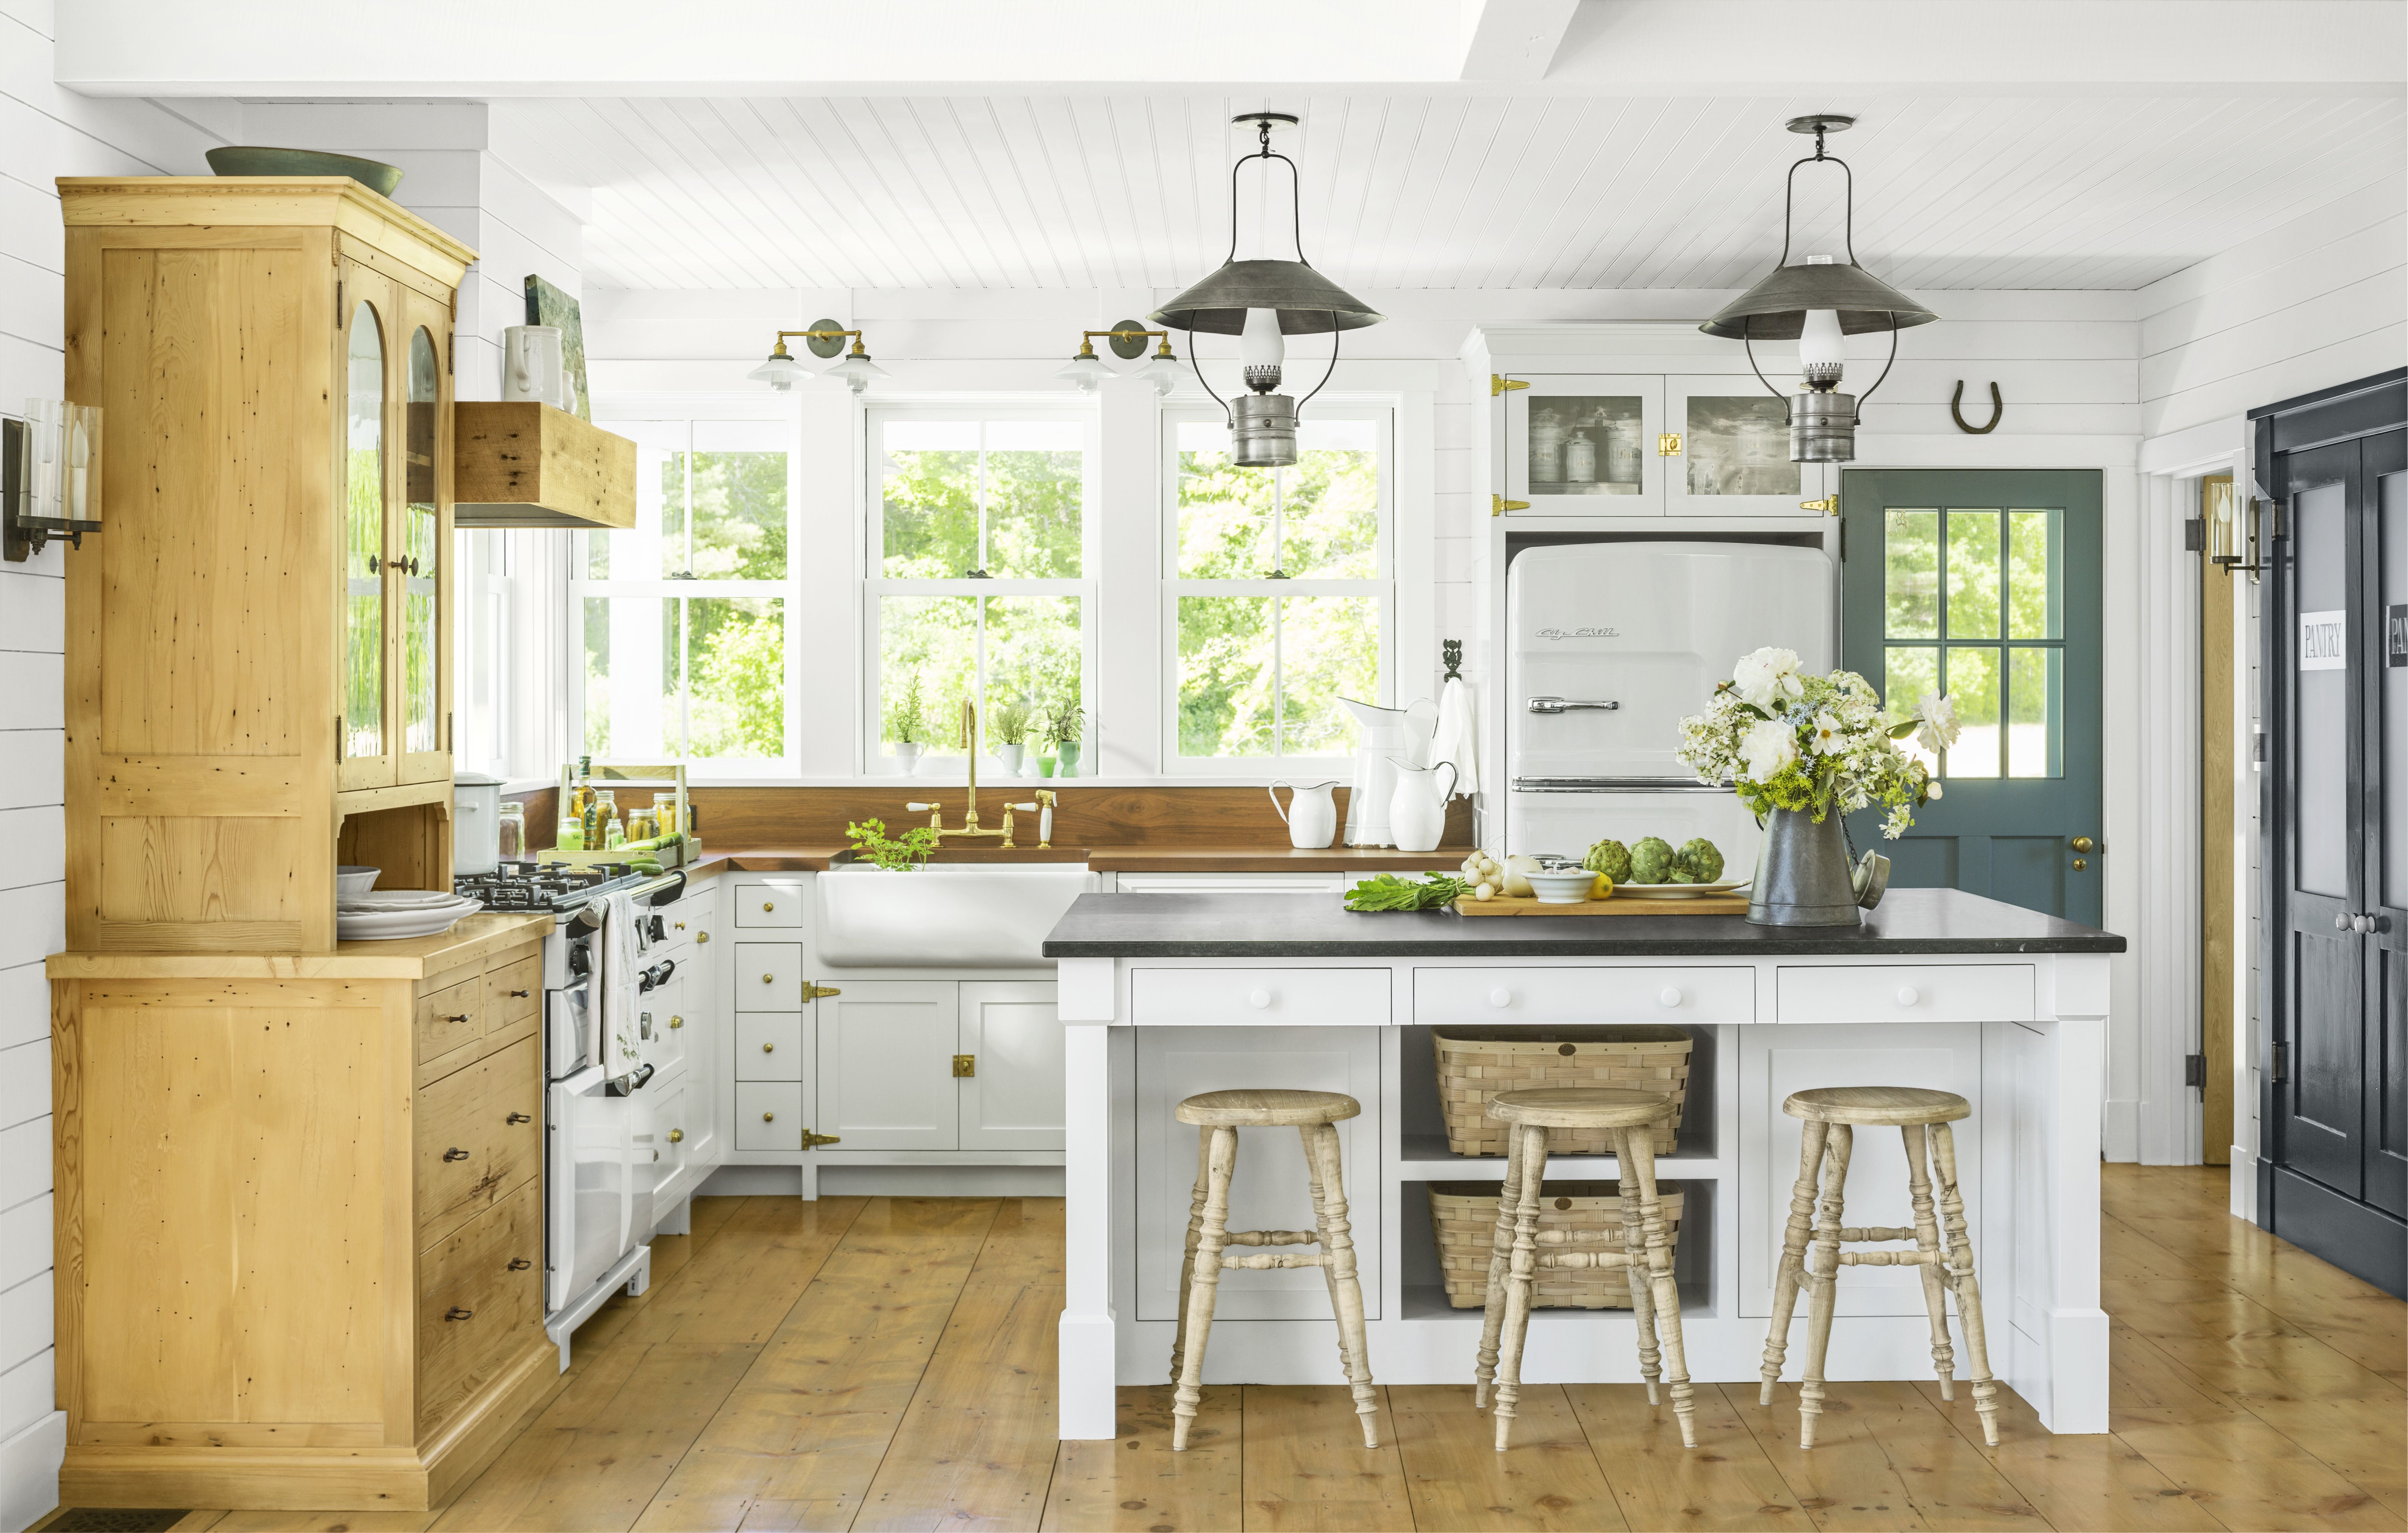 How To Refinish Cabinets For A Stunning Kitchen Makeover Can Be Fun For Everyone